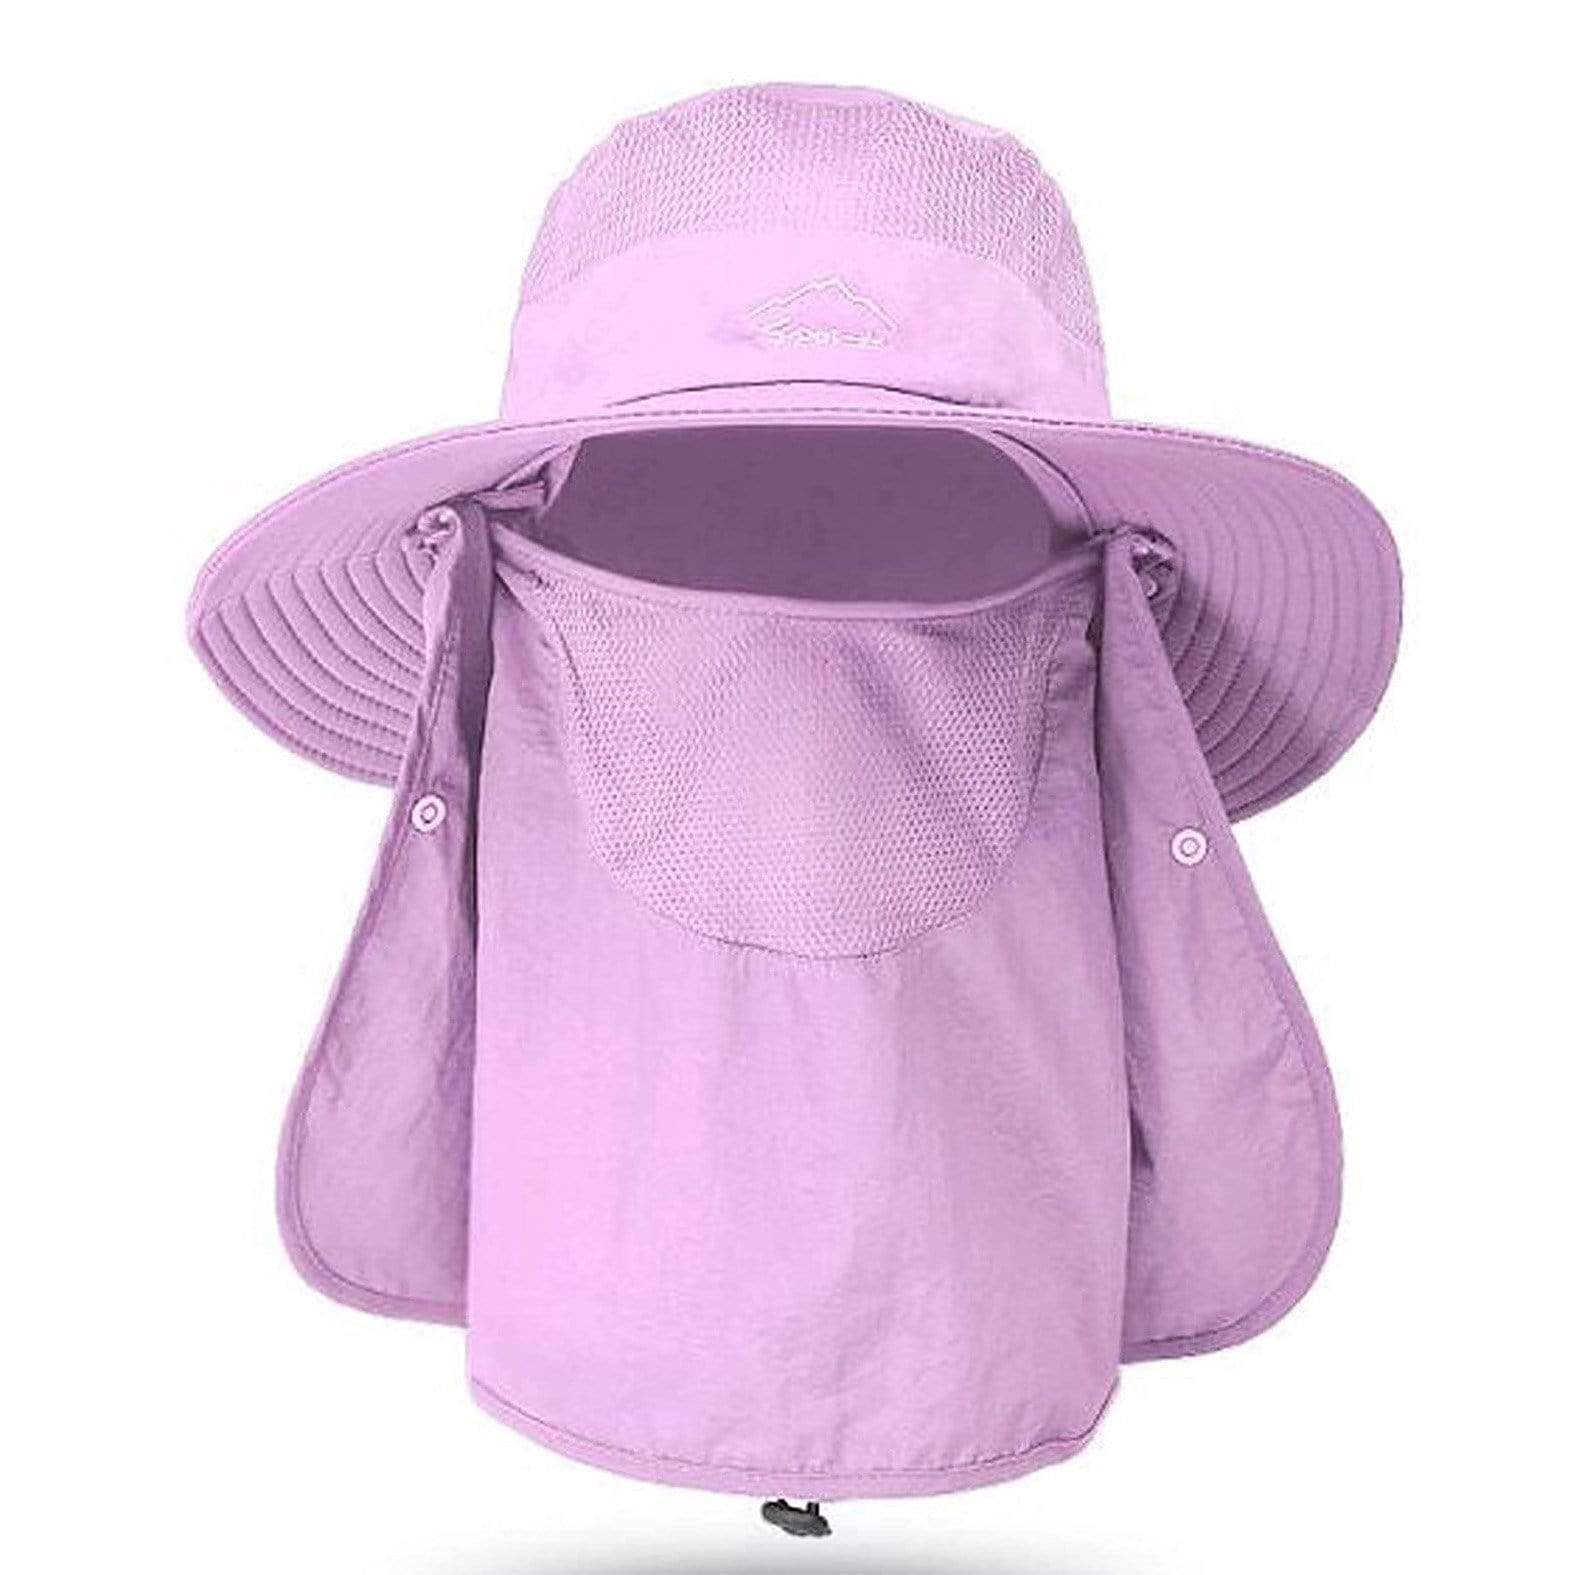 MIERSPORT Fishing Hat Sun Cap with Removable Face Neck Cover, Purple